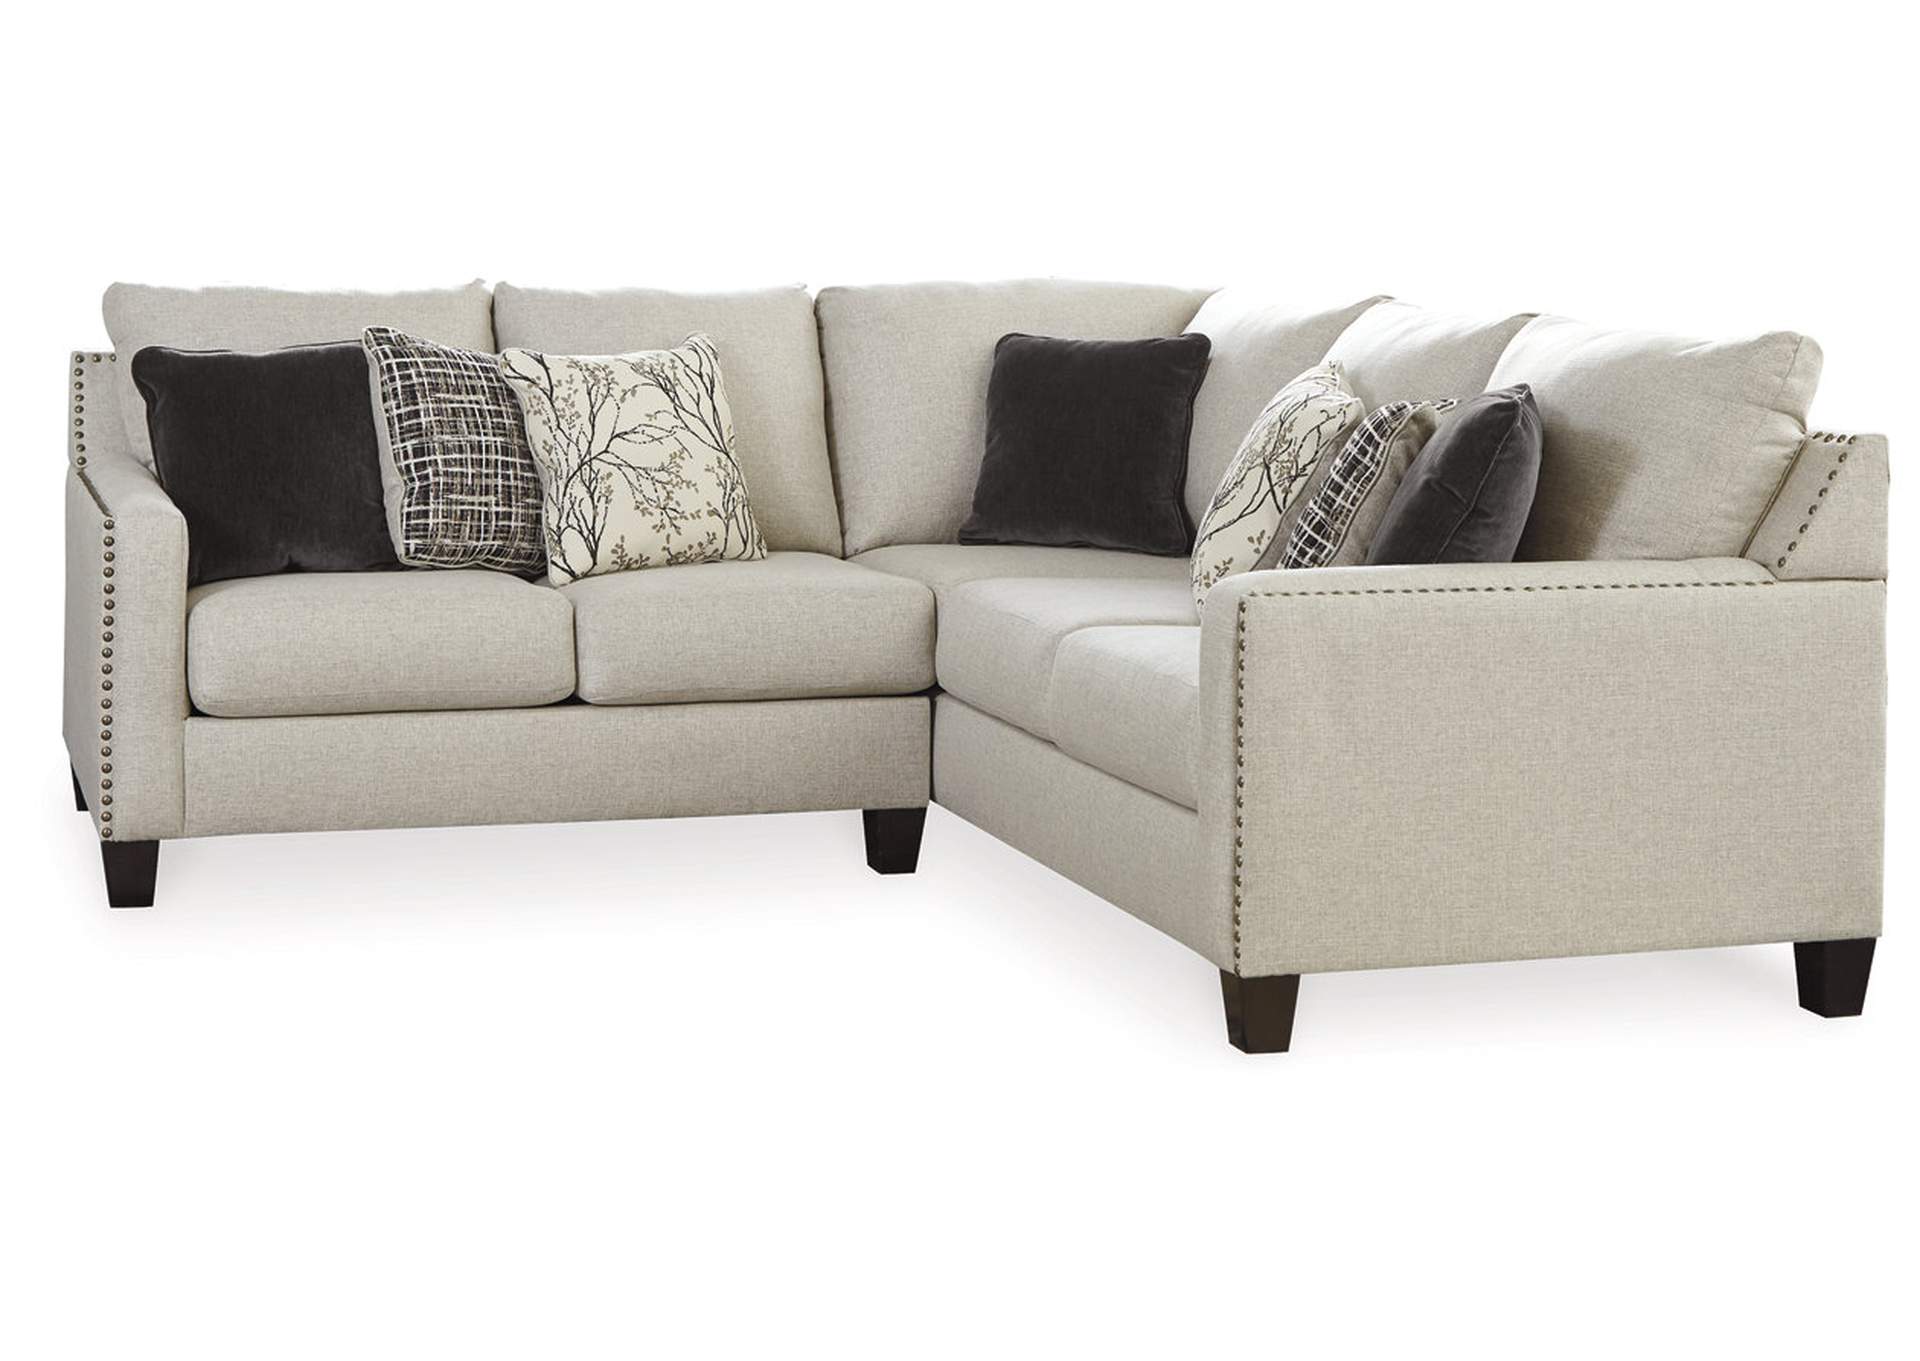 Hallenberg 2-Piece Sectional,Signature Design By Ashley